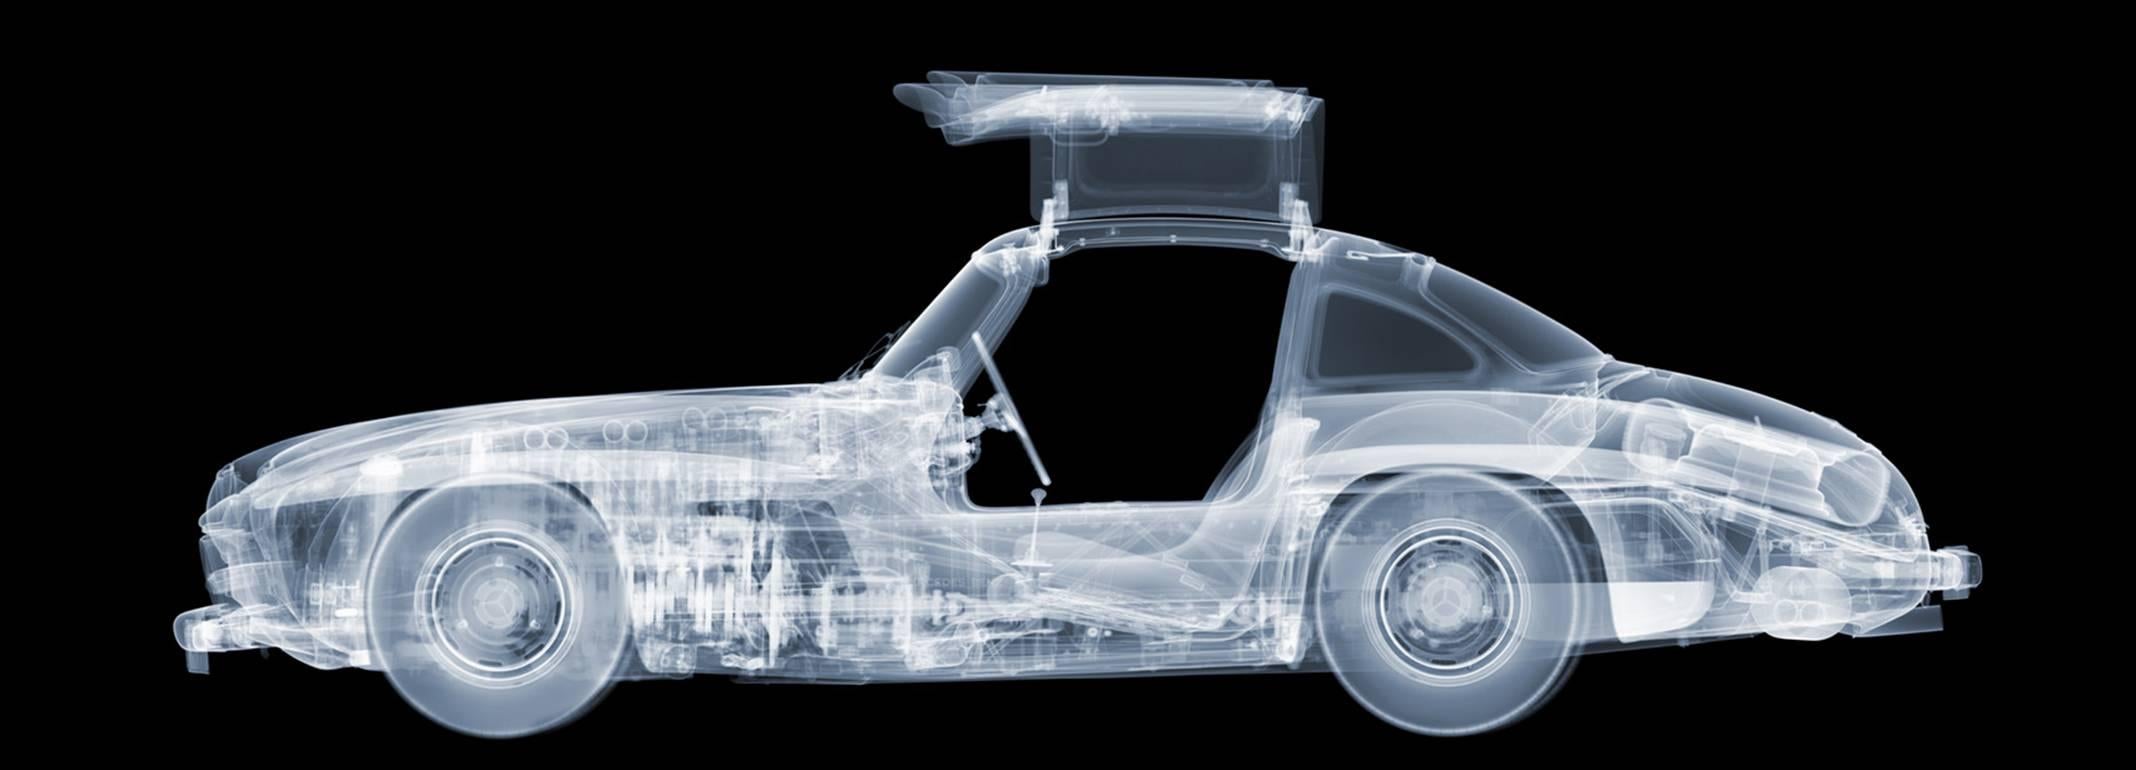 Nick Veasey Abstract Photograph – 1955 Mercedes 300 SL Gull-Wing, Gull-Wing